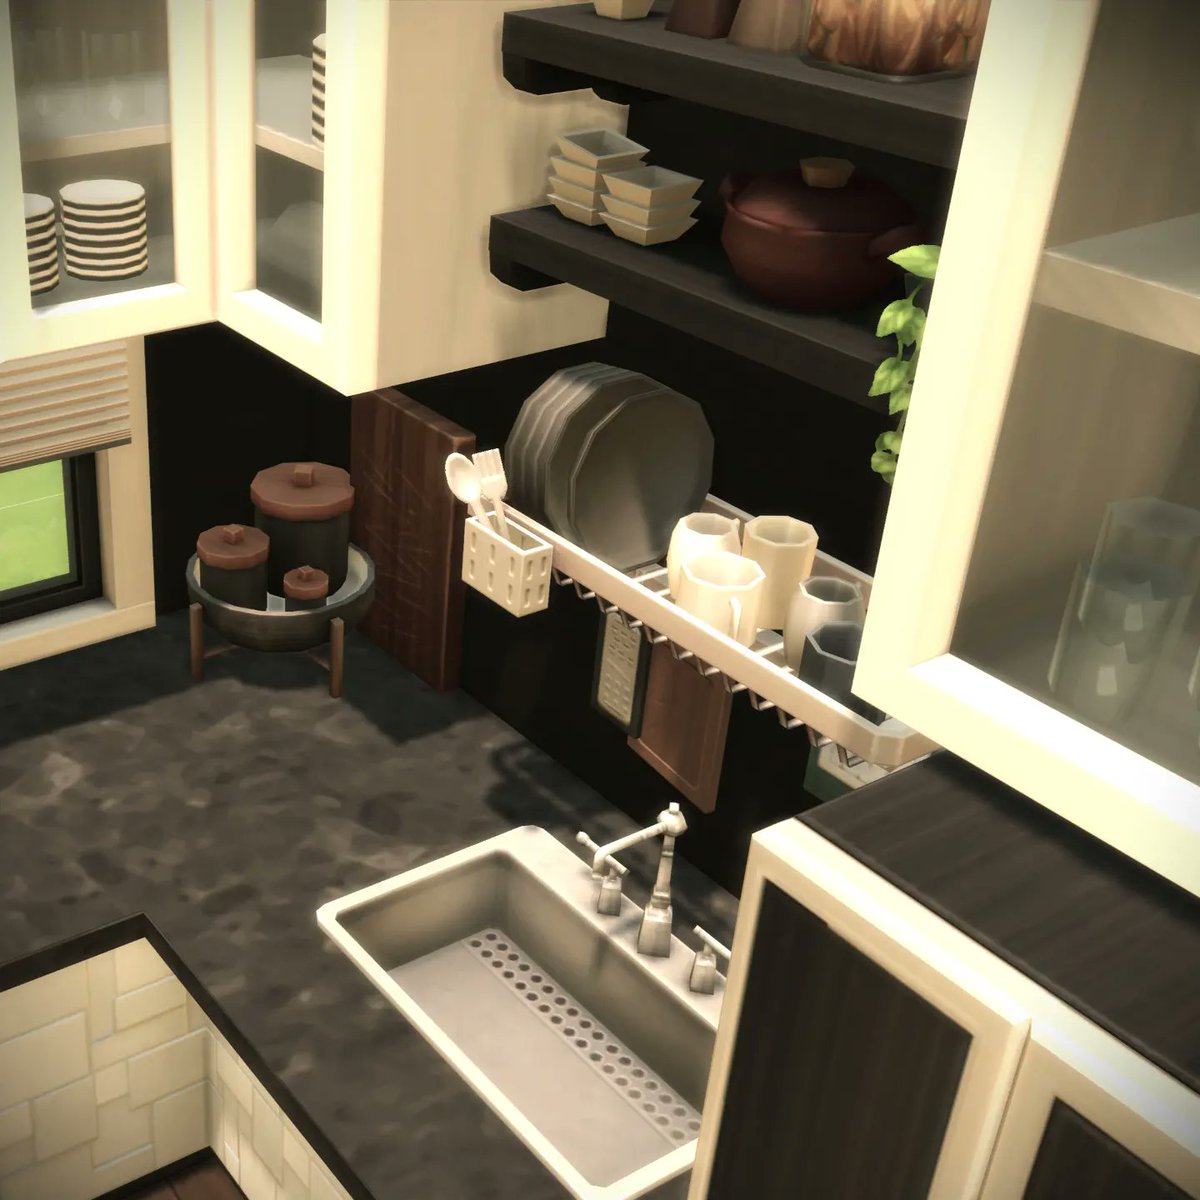 Sul sul🌼... this is the 3rd Day of the awesome #9daysroomchallenge by the great @axiisims. 💝 This is my favorite Colour Combo. I'd build a modern Kitchen. Hope u like it!🌼 🌺Download in my Gallery. EA ID #Juliee86 #sims #ts4 #sims4 #ShowUsYourBuilds